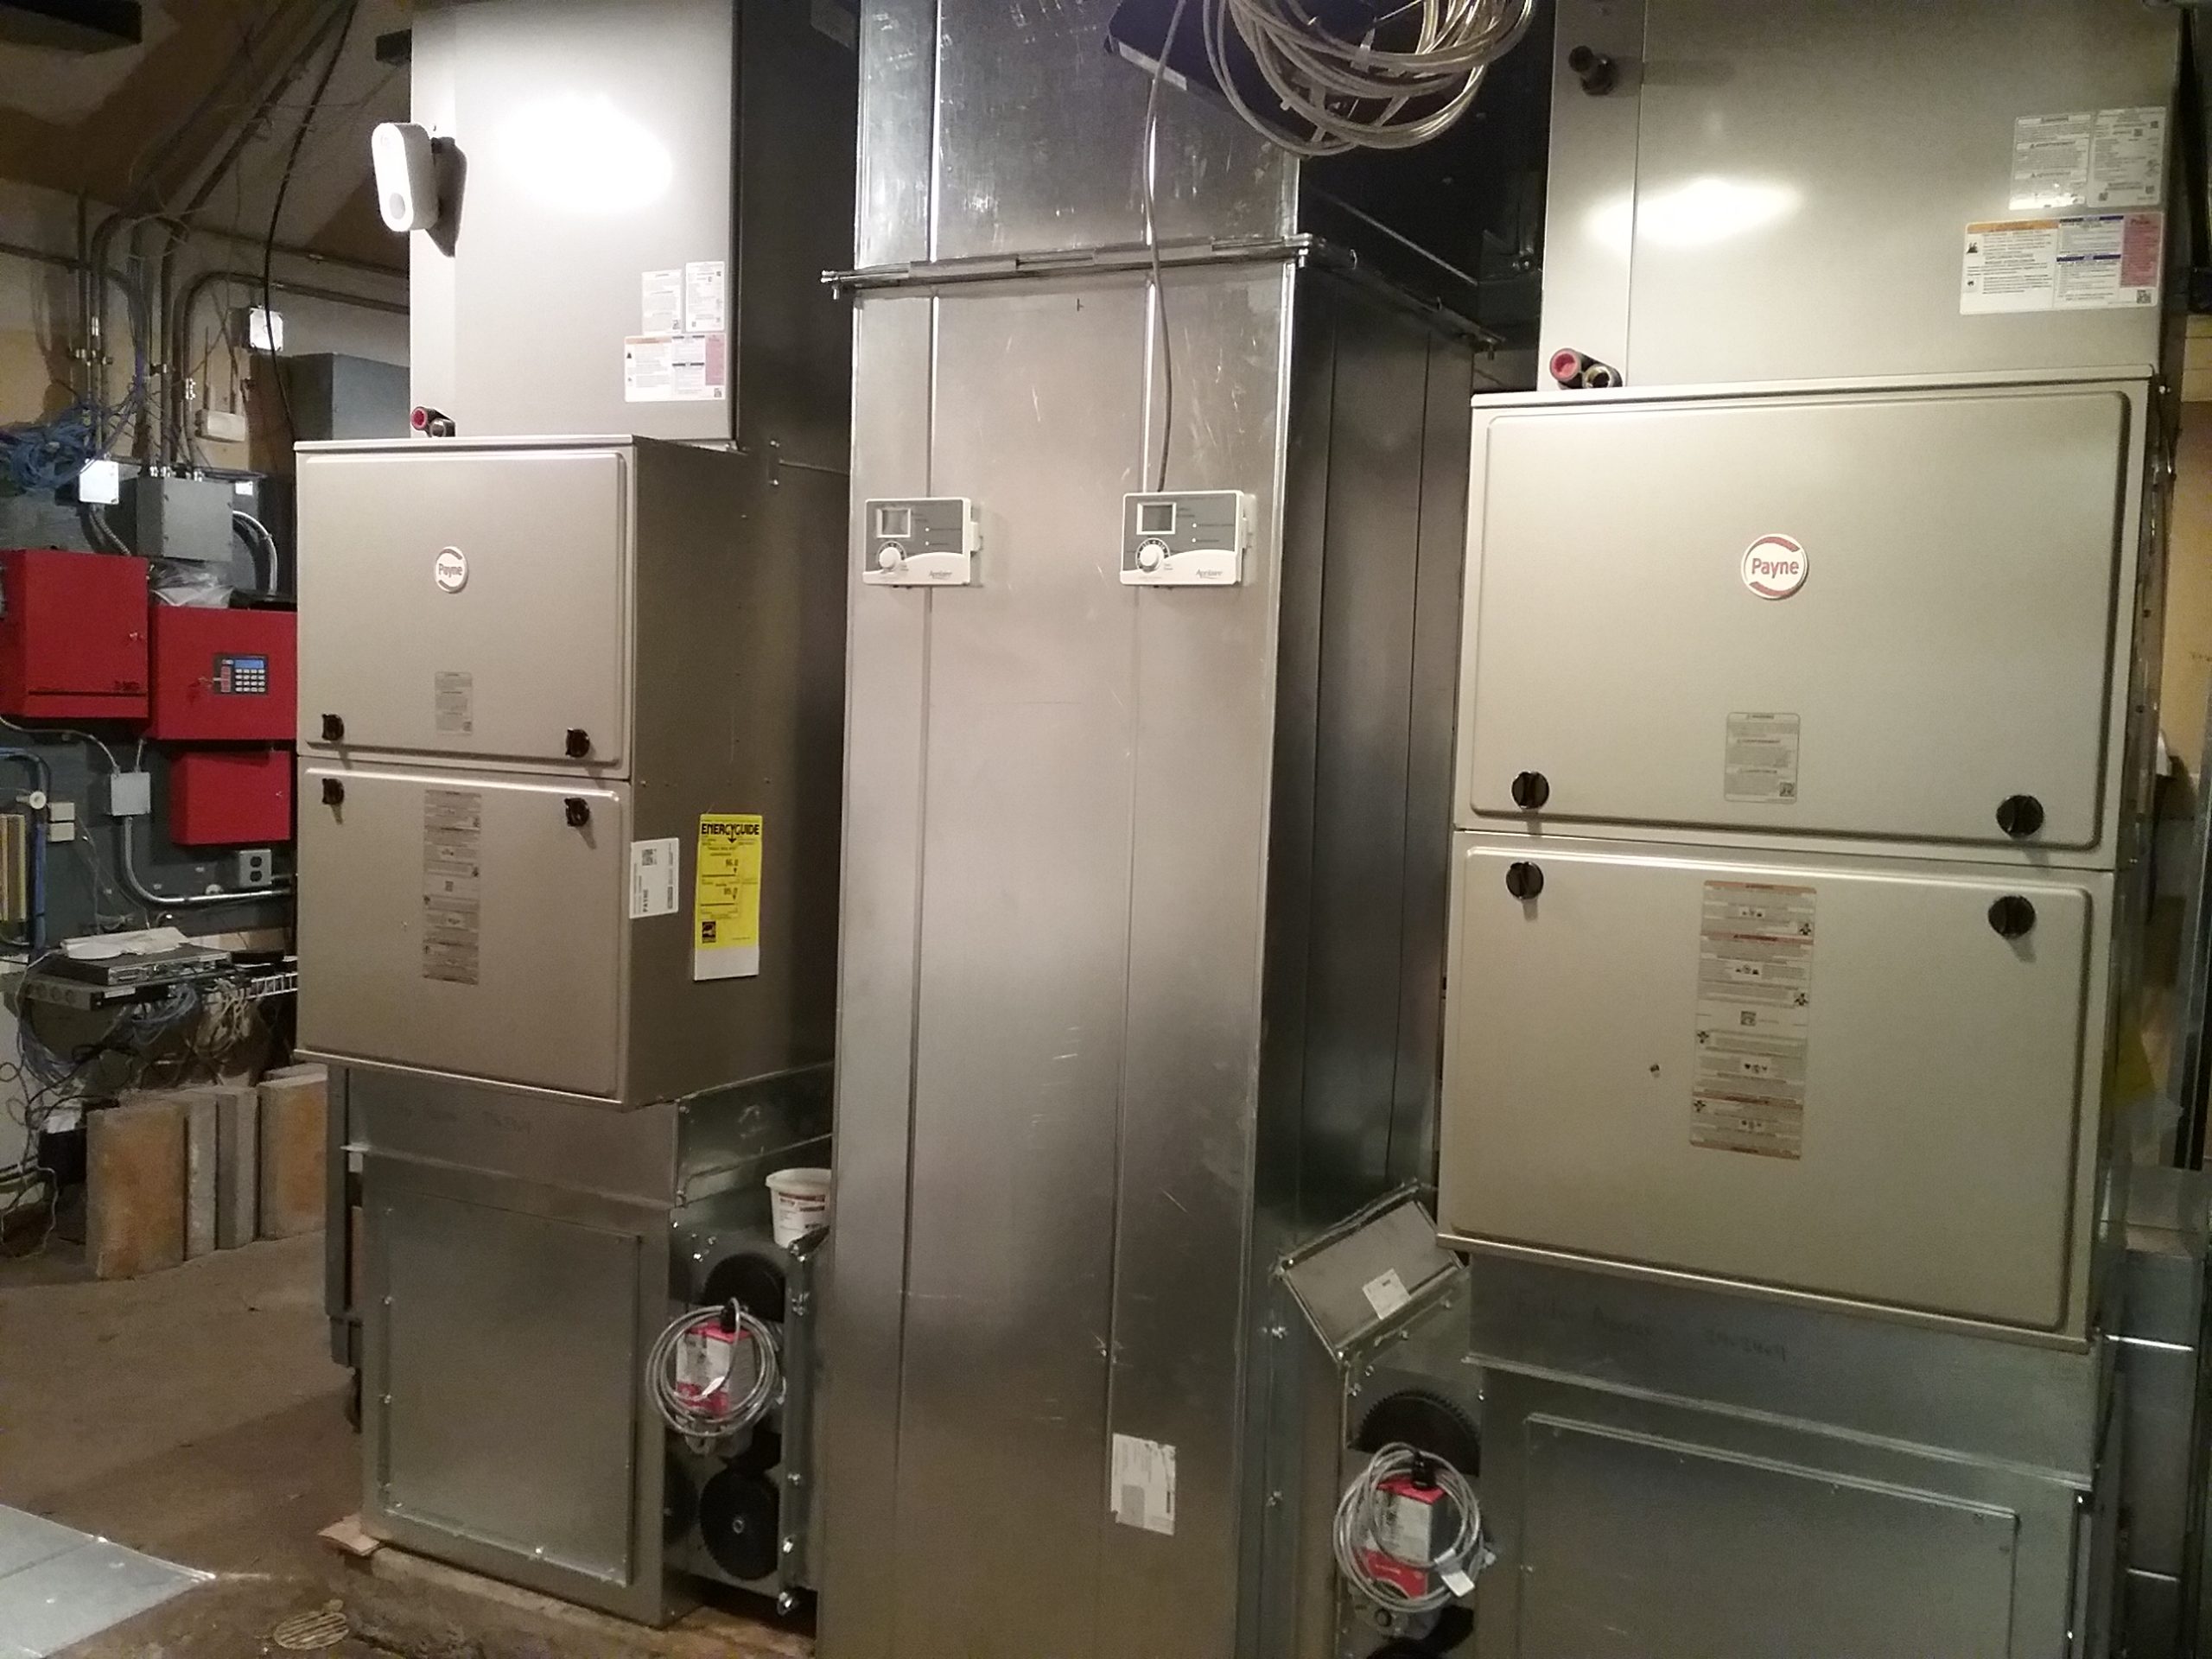 New high-efficiency gas furnaces being installed at The Charles A. Weyerhaeuser Memorial Museum in Little Falls, MN, October 2021.